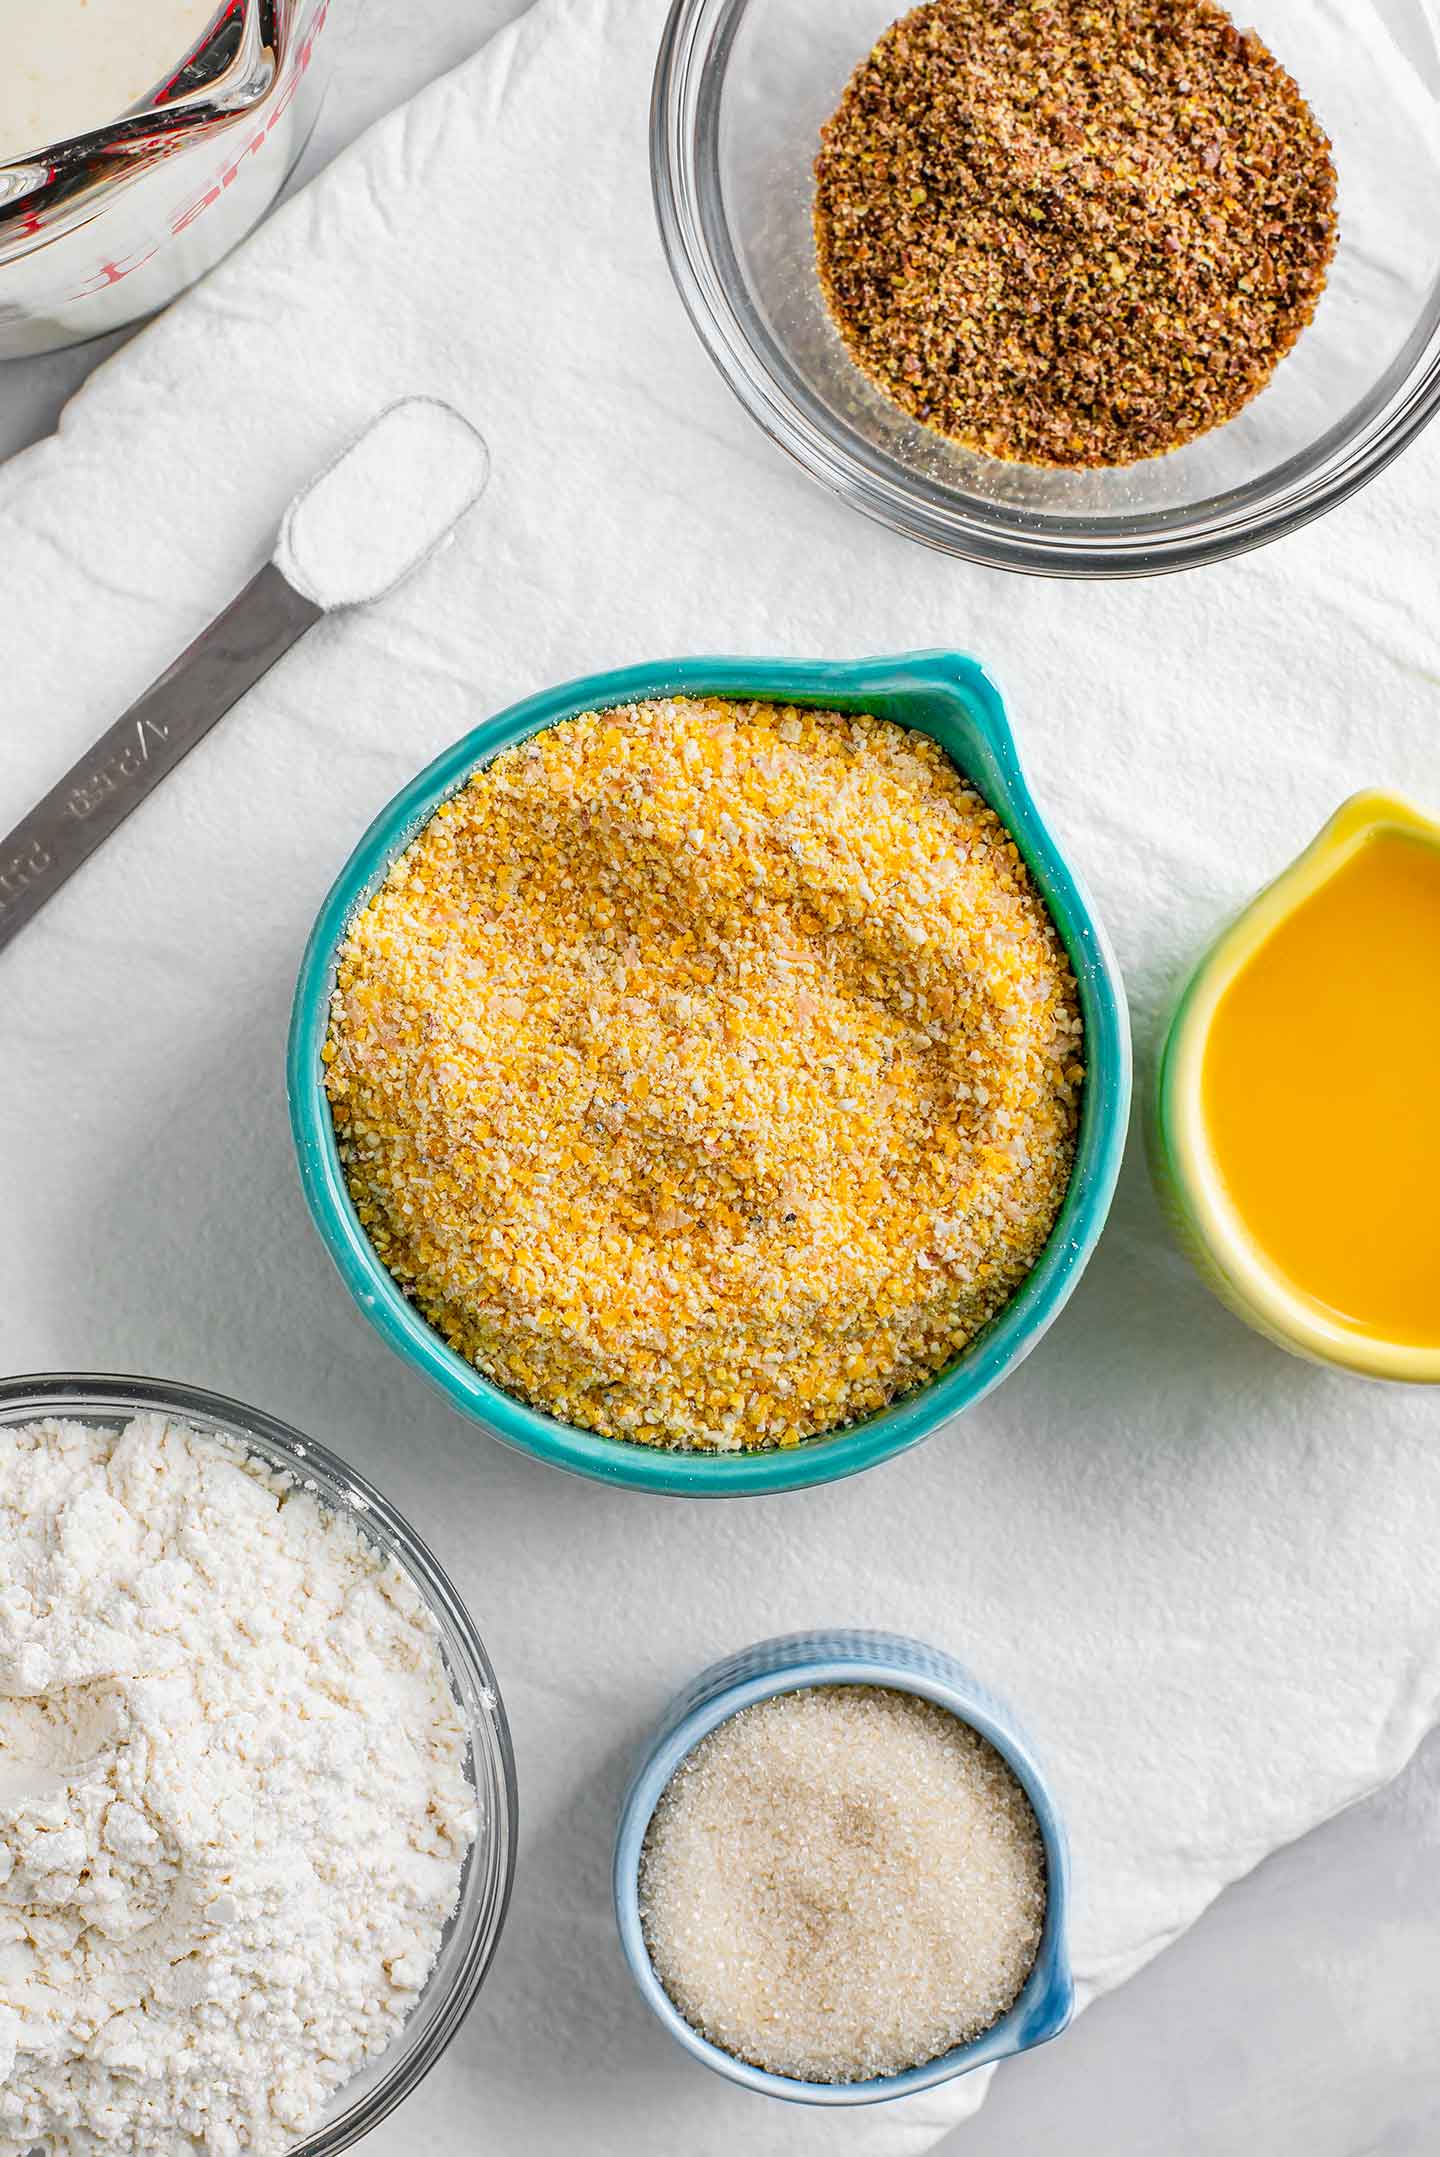 Top down view of coarse yellow cornmeal, white all purpose flour, flaxseed meal, cane sugar, melted butter and baking soda displayed on a tray. Buttermilk fills a glass measuring cup.